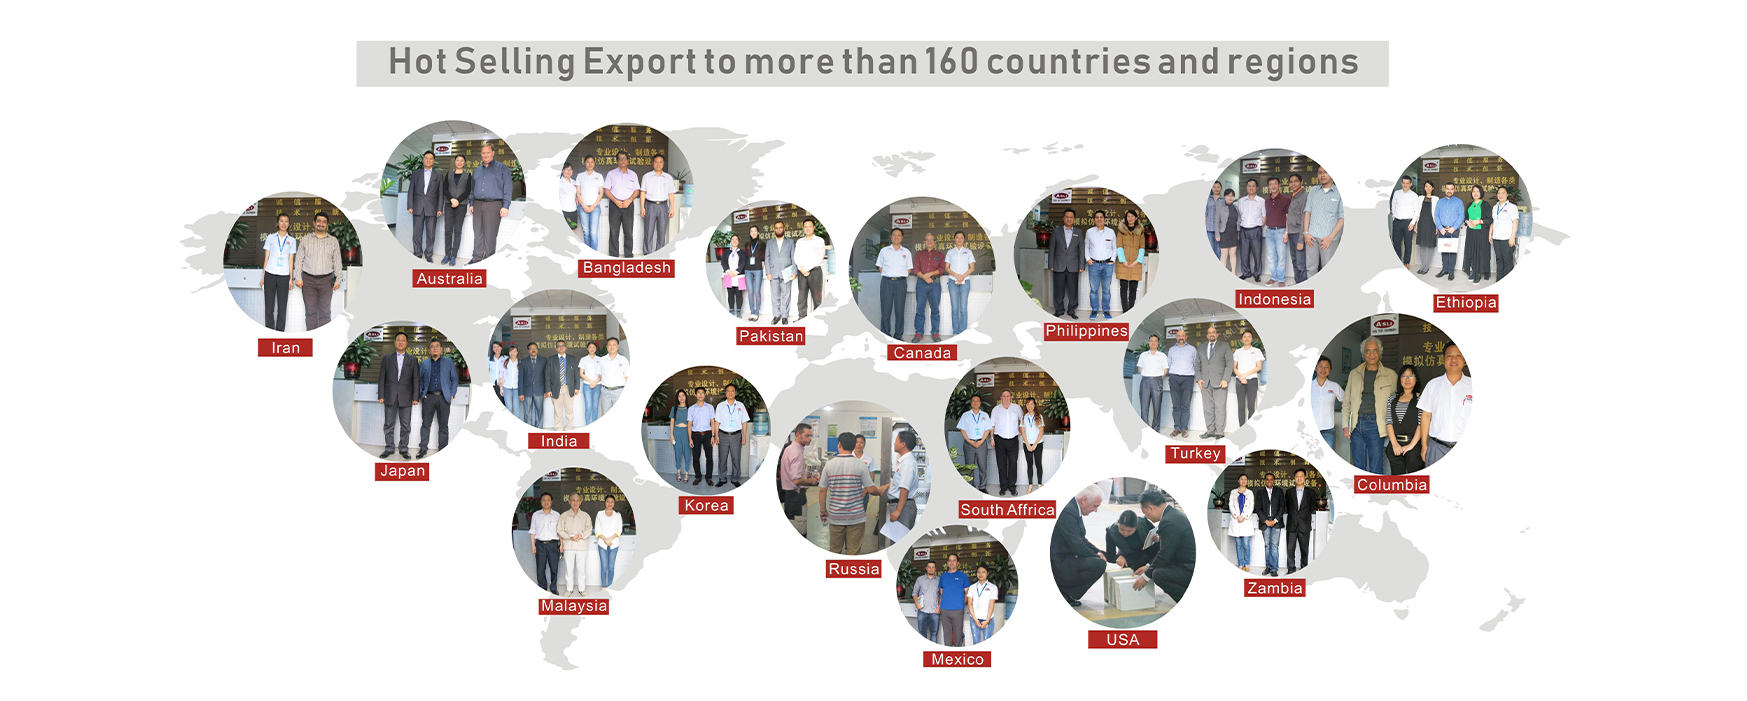 OUR WORLDWIDE COOPERATION CUSTOMERS